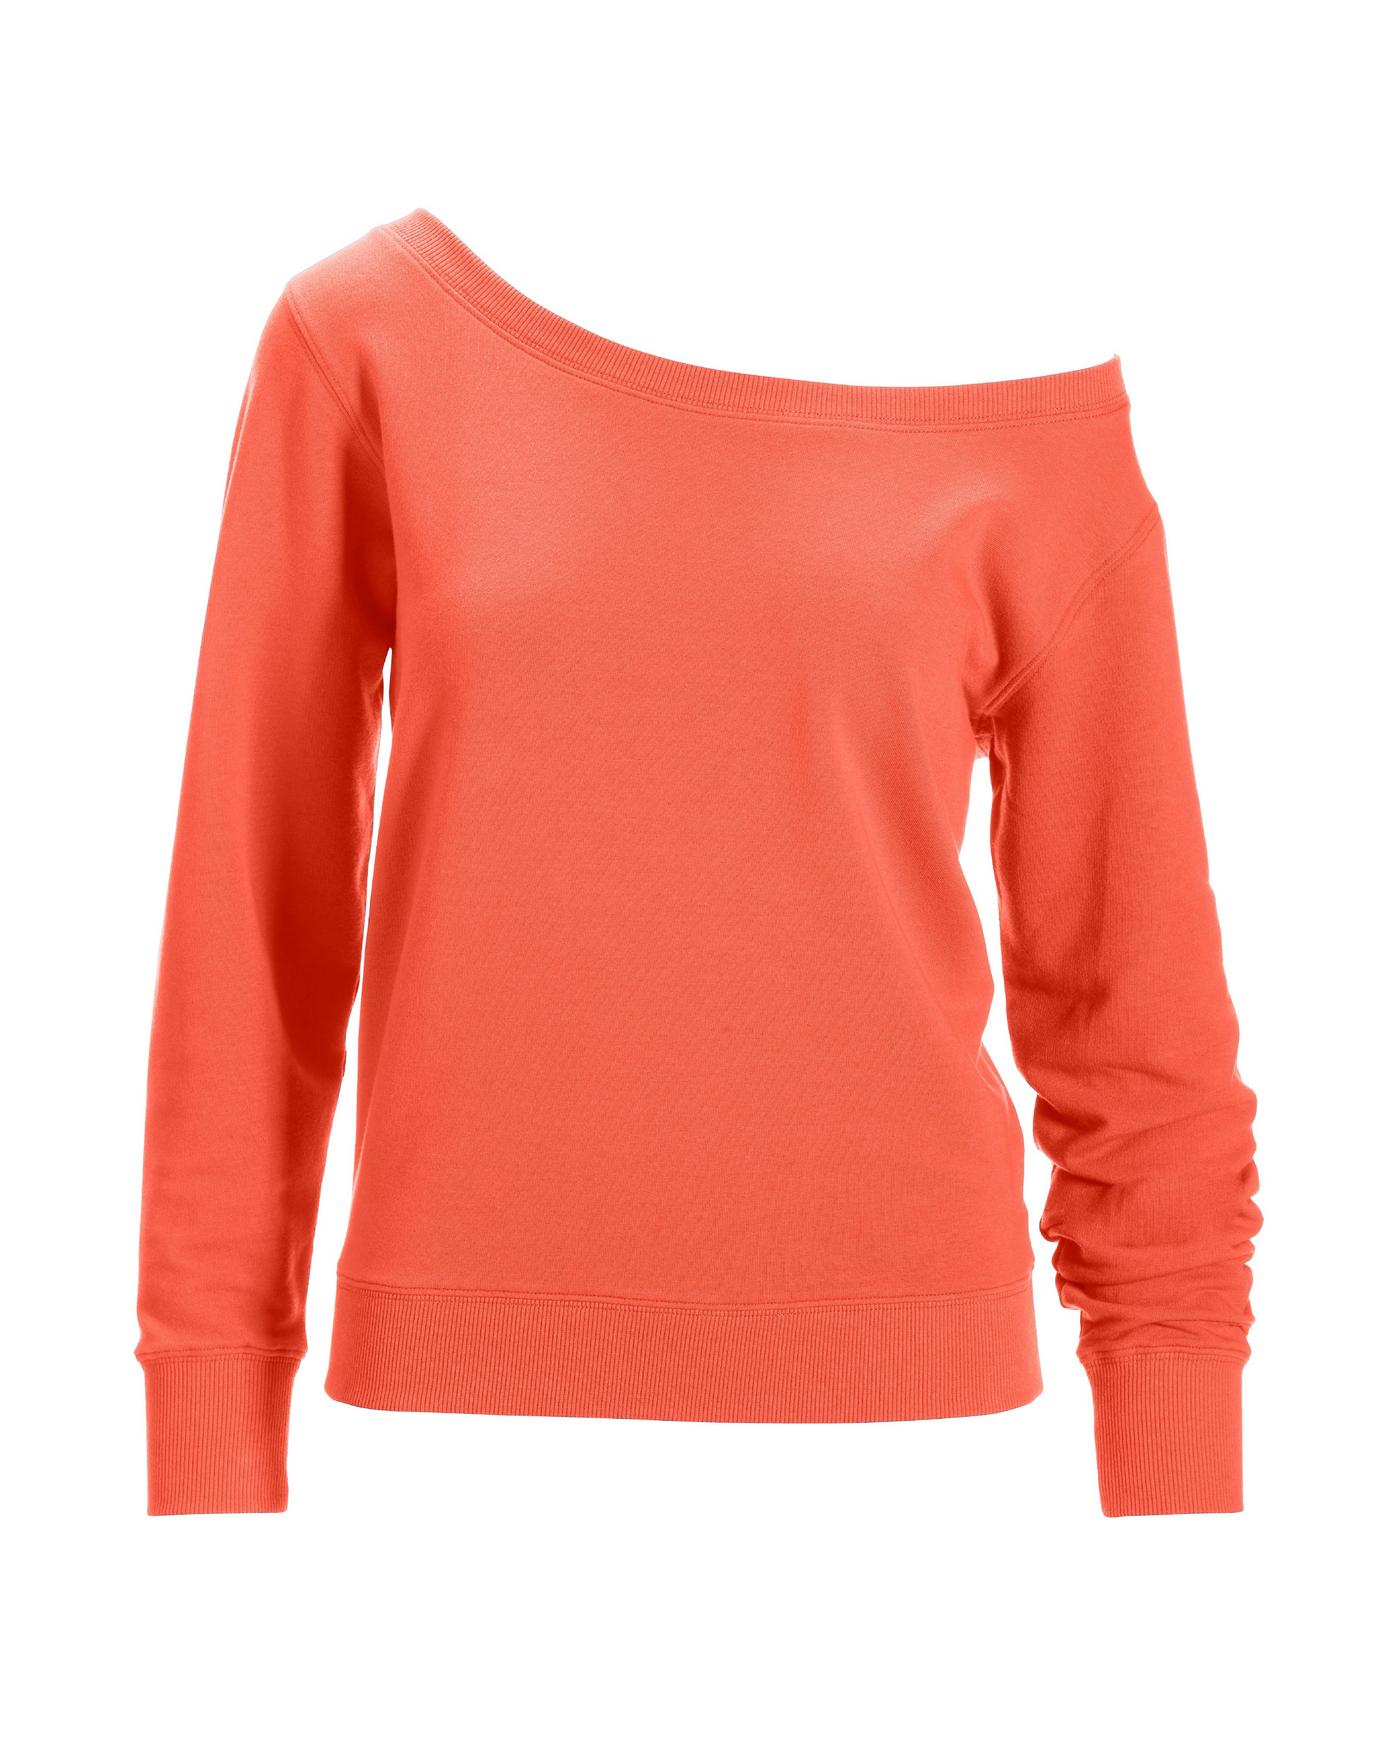 Slouchy French Terry Pullover Sweatshirt - Hot Coral Orange | Boston Proper